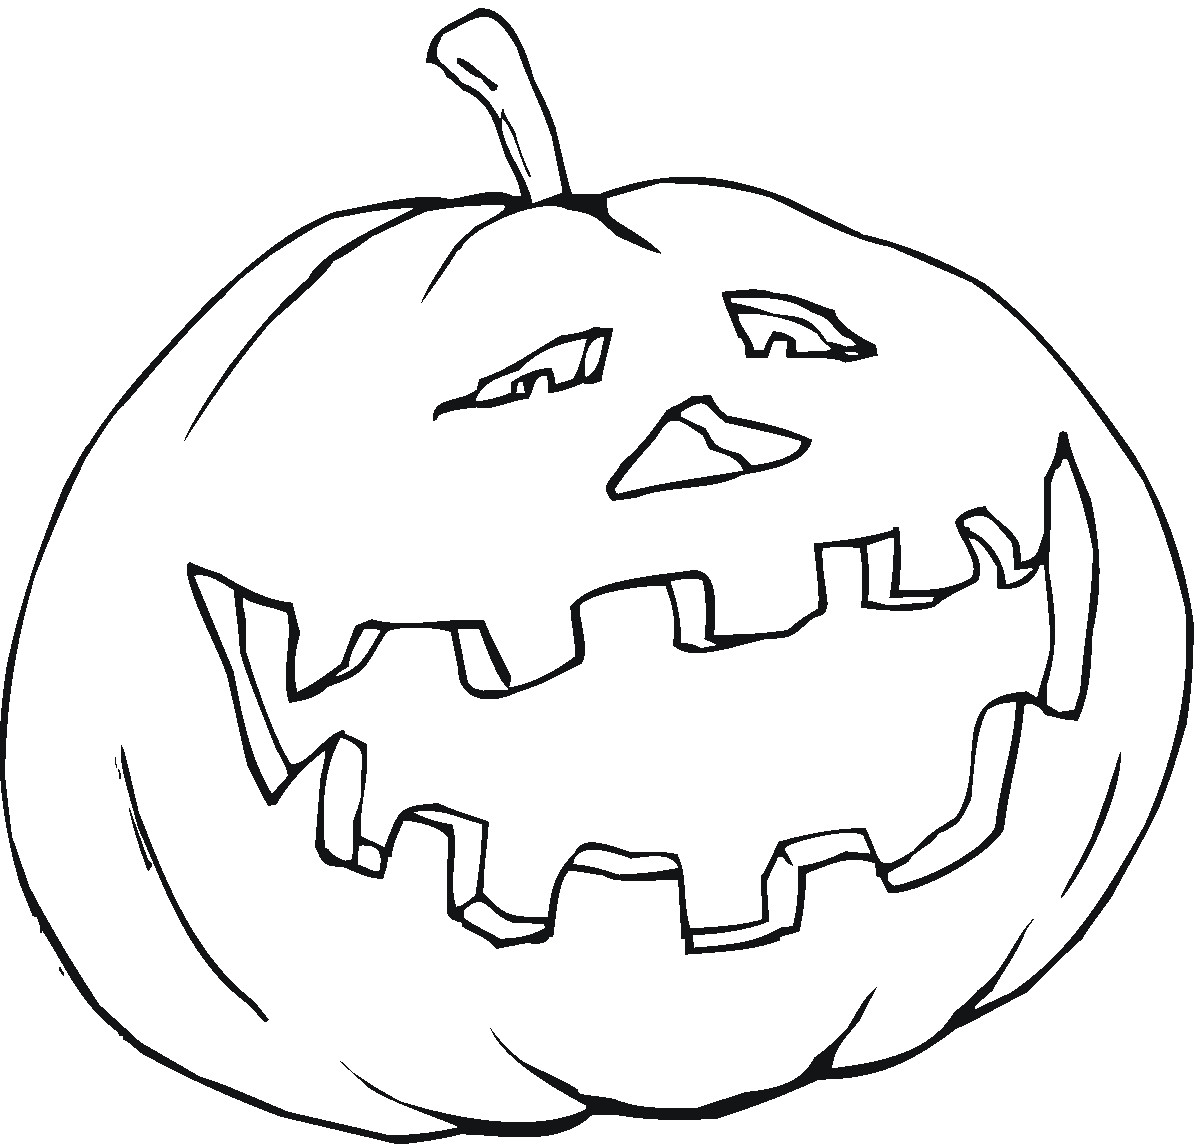 Free Pumpkin Coloring Pages
 Free Printable Pumpkin Coloring Pages For Kids